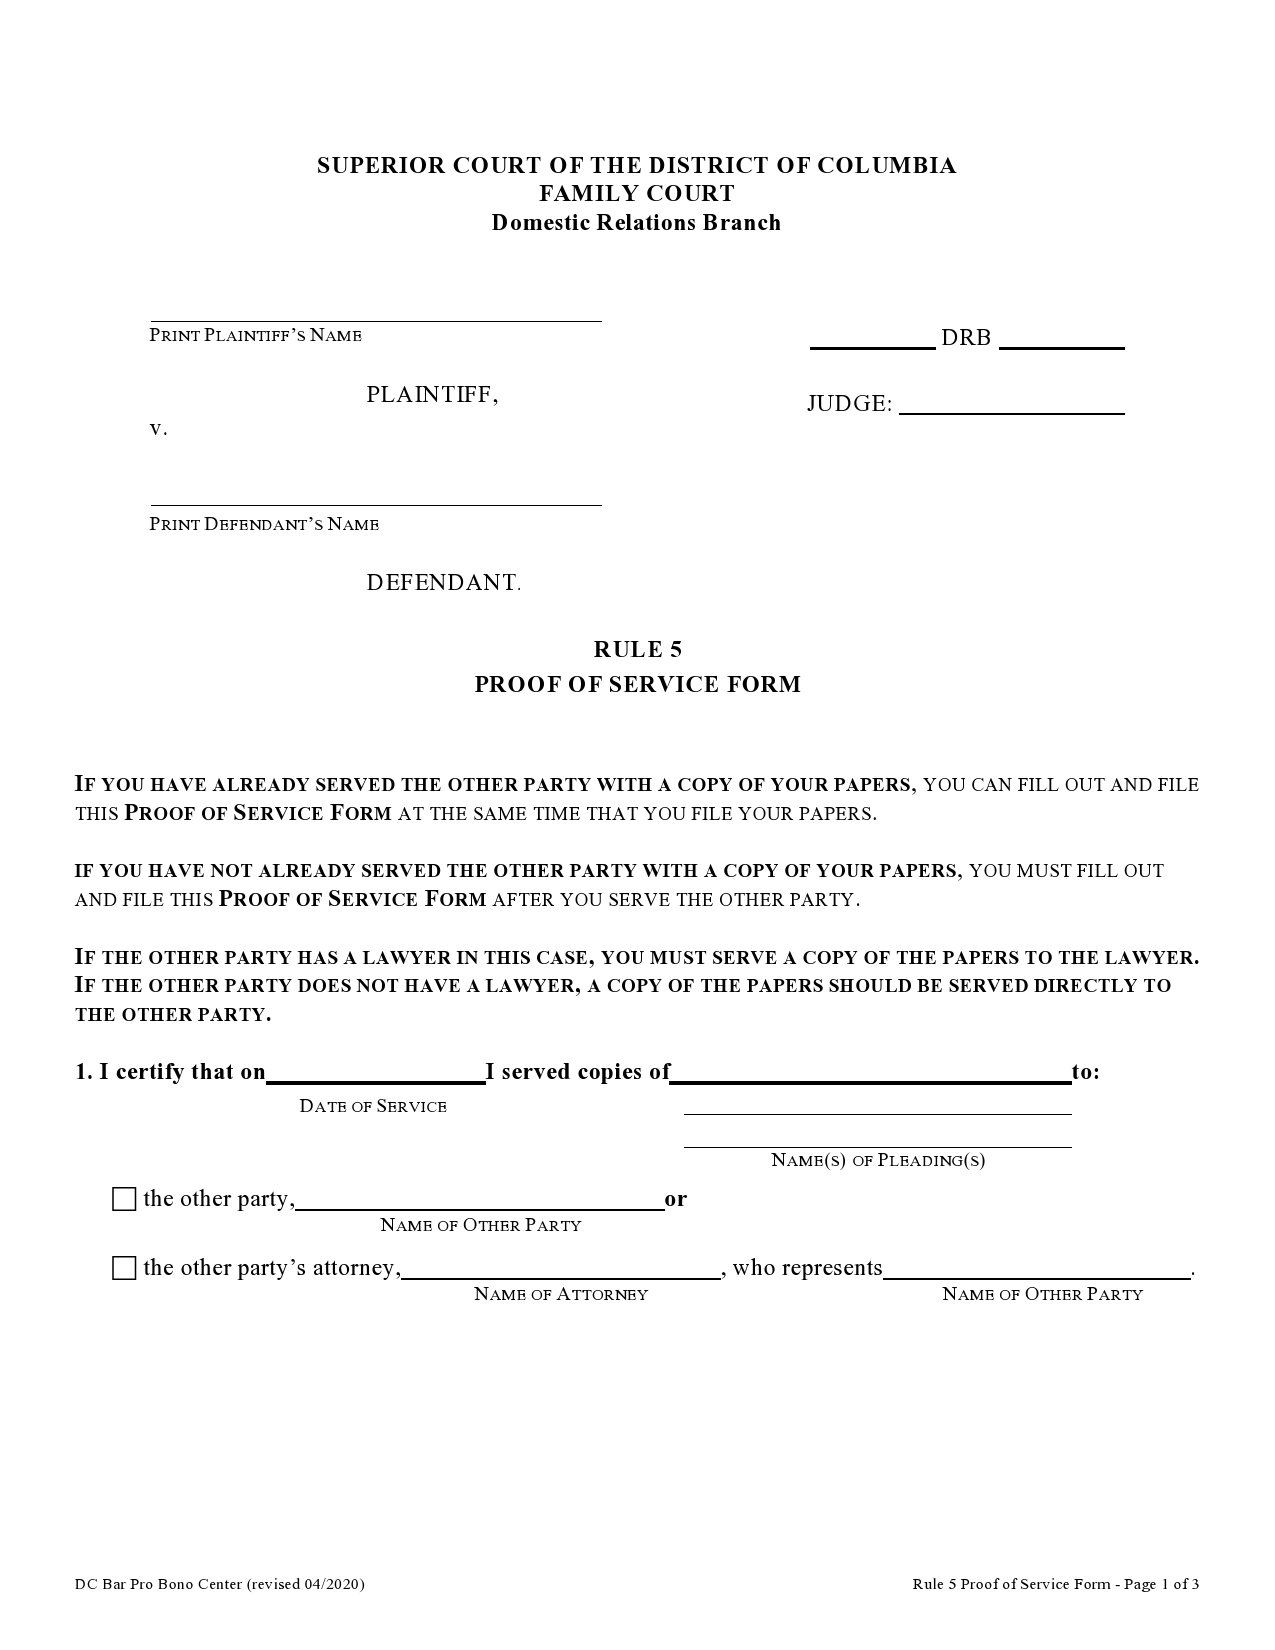 Free proof of service form 15